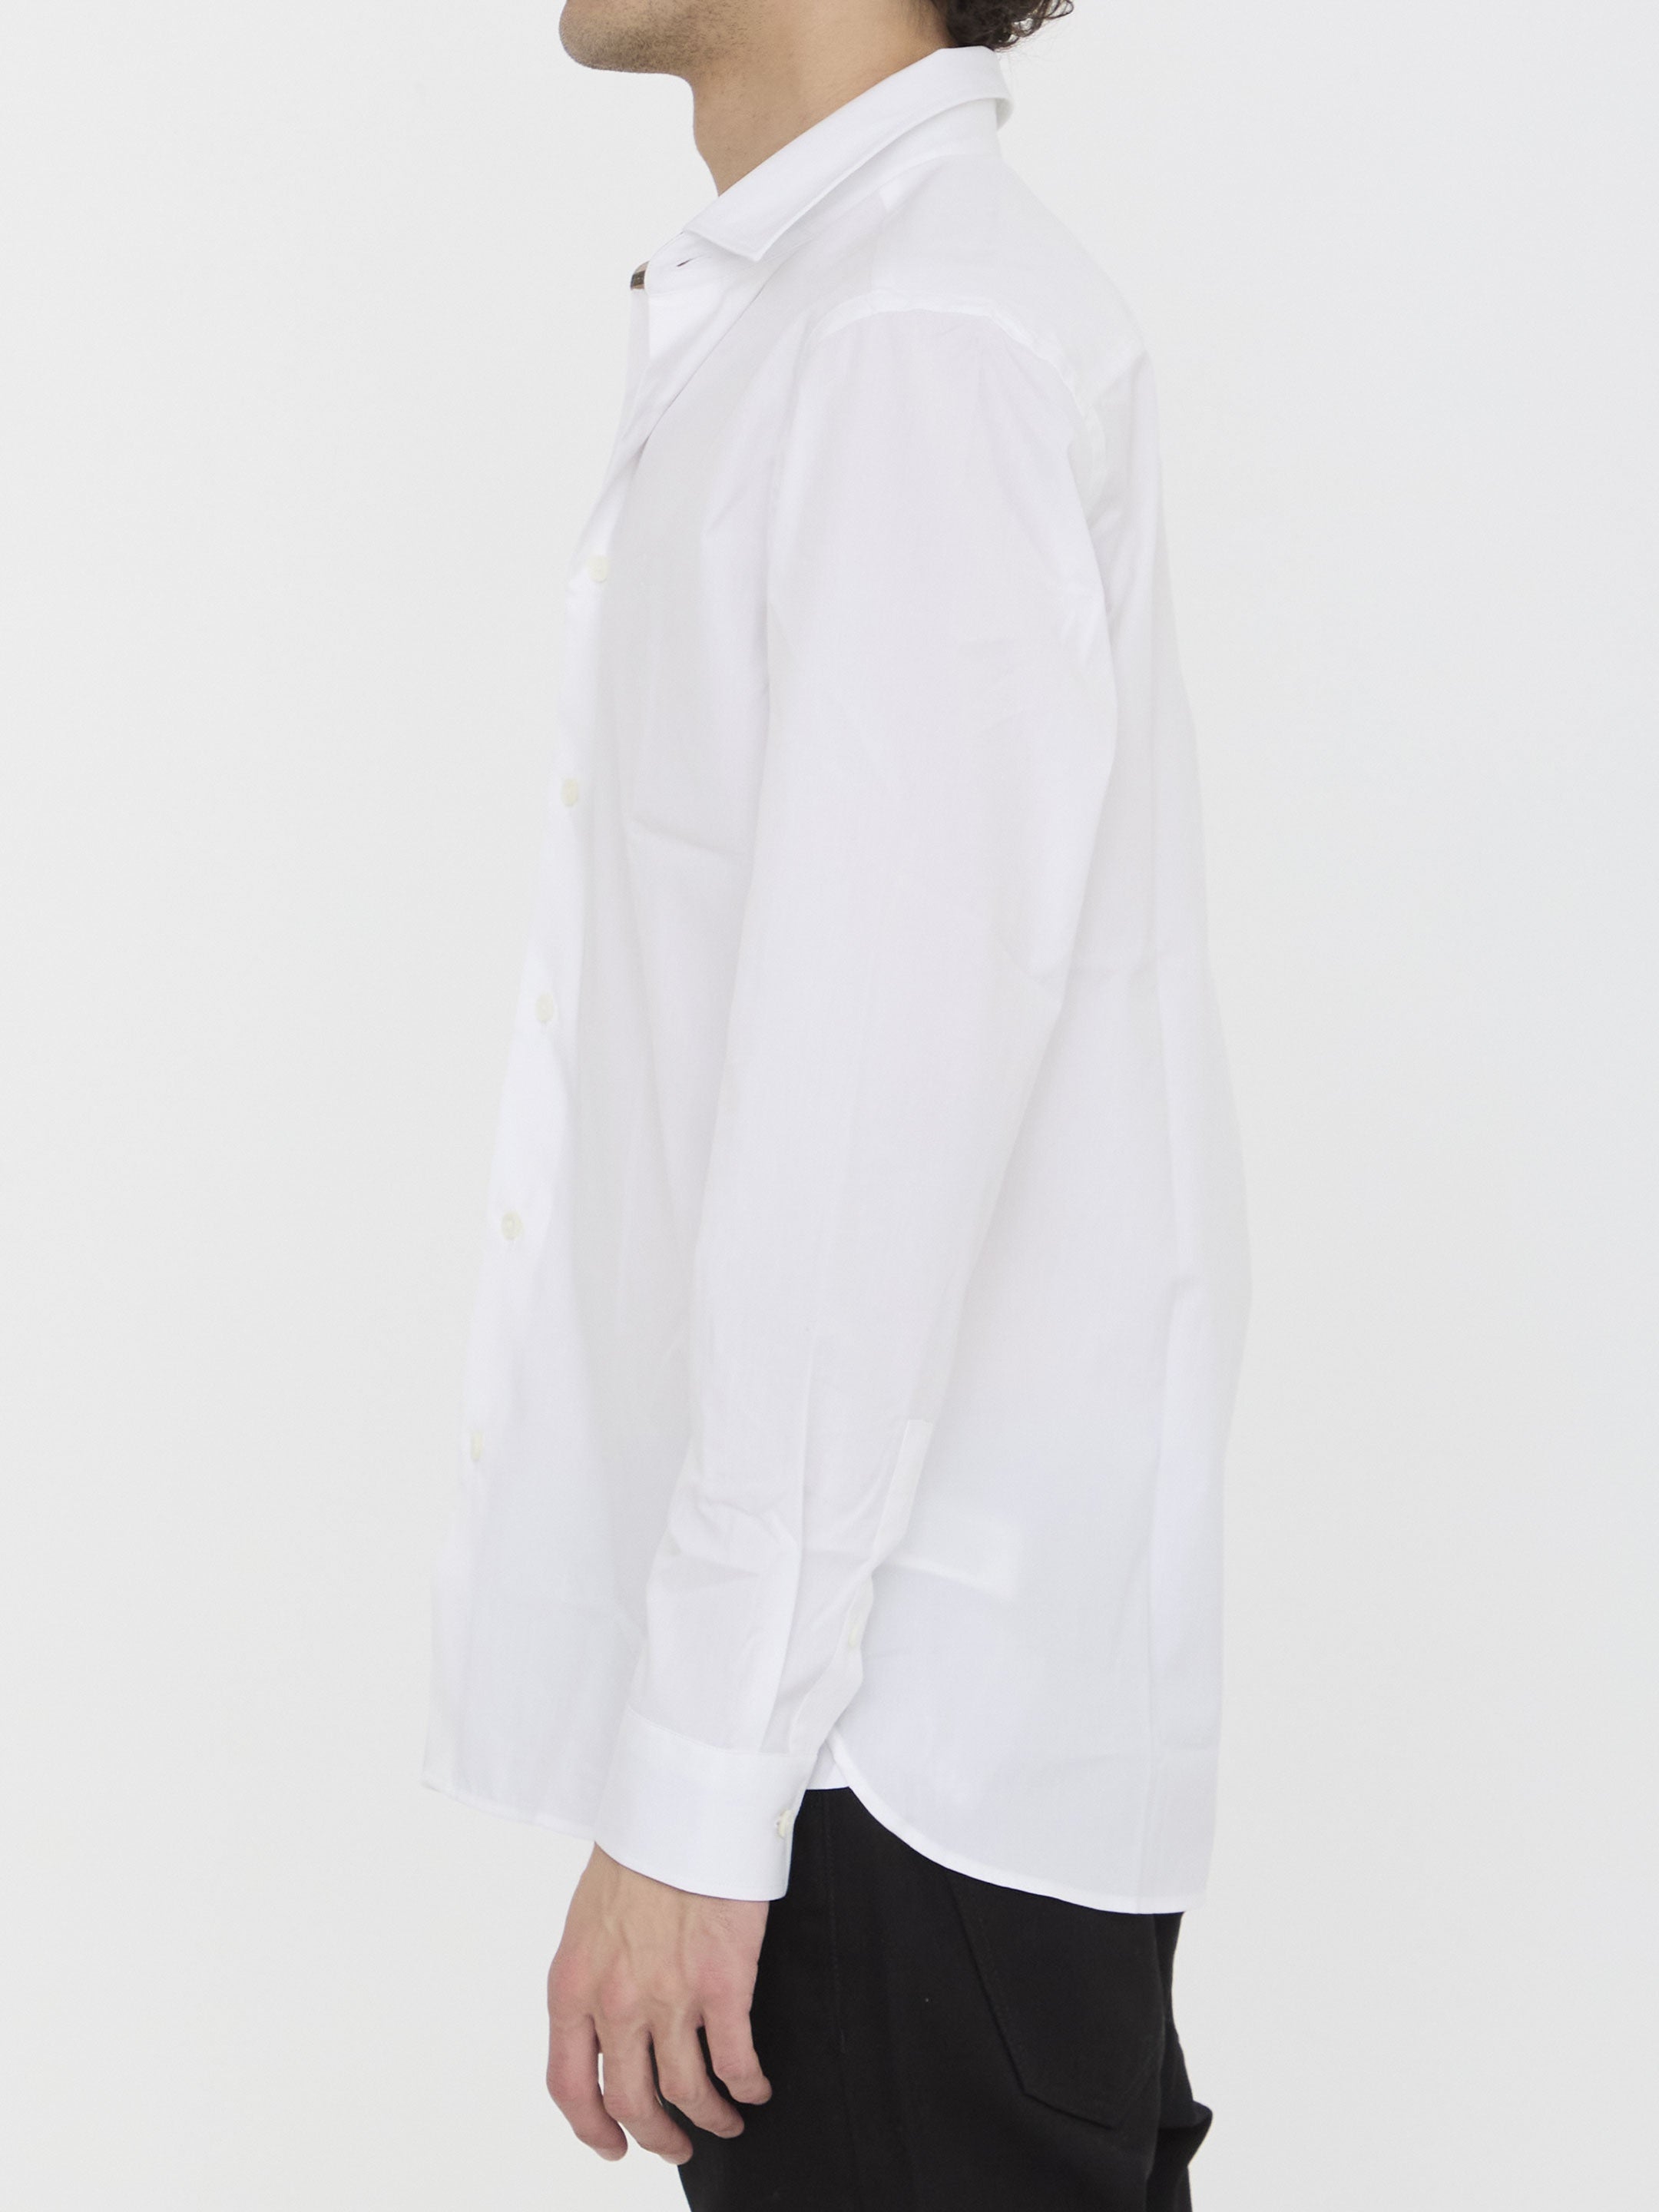 BURBERRY-OUTLET-SALE-Stretch-cotton-shirt-Shirts-M-WHITE-ARCHIVE-COLLECTION-3.jpg